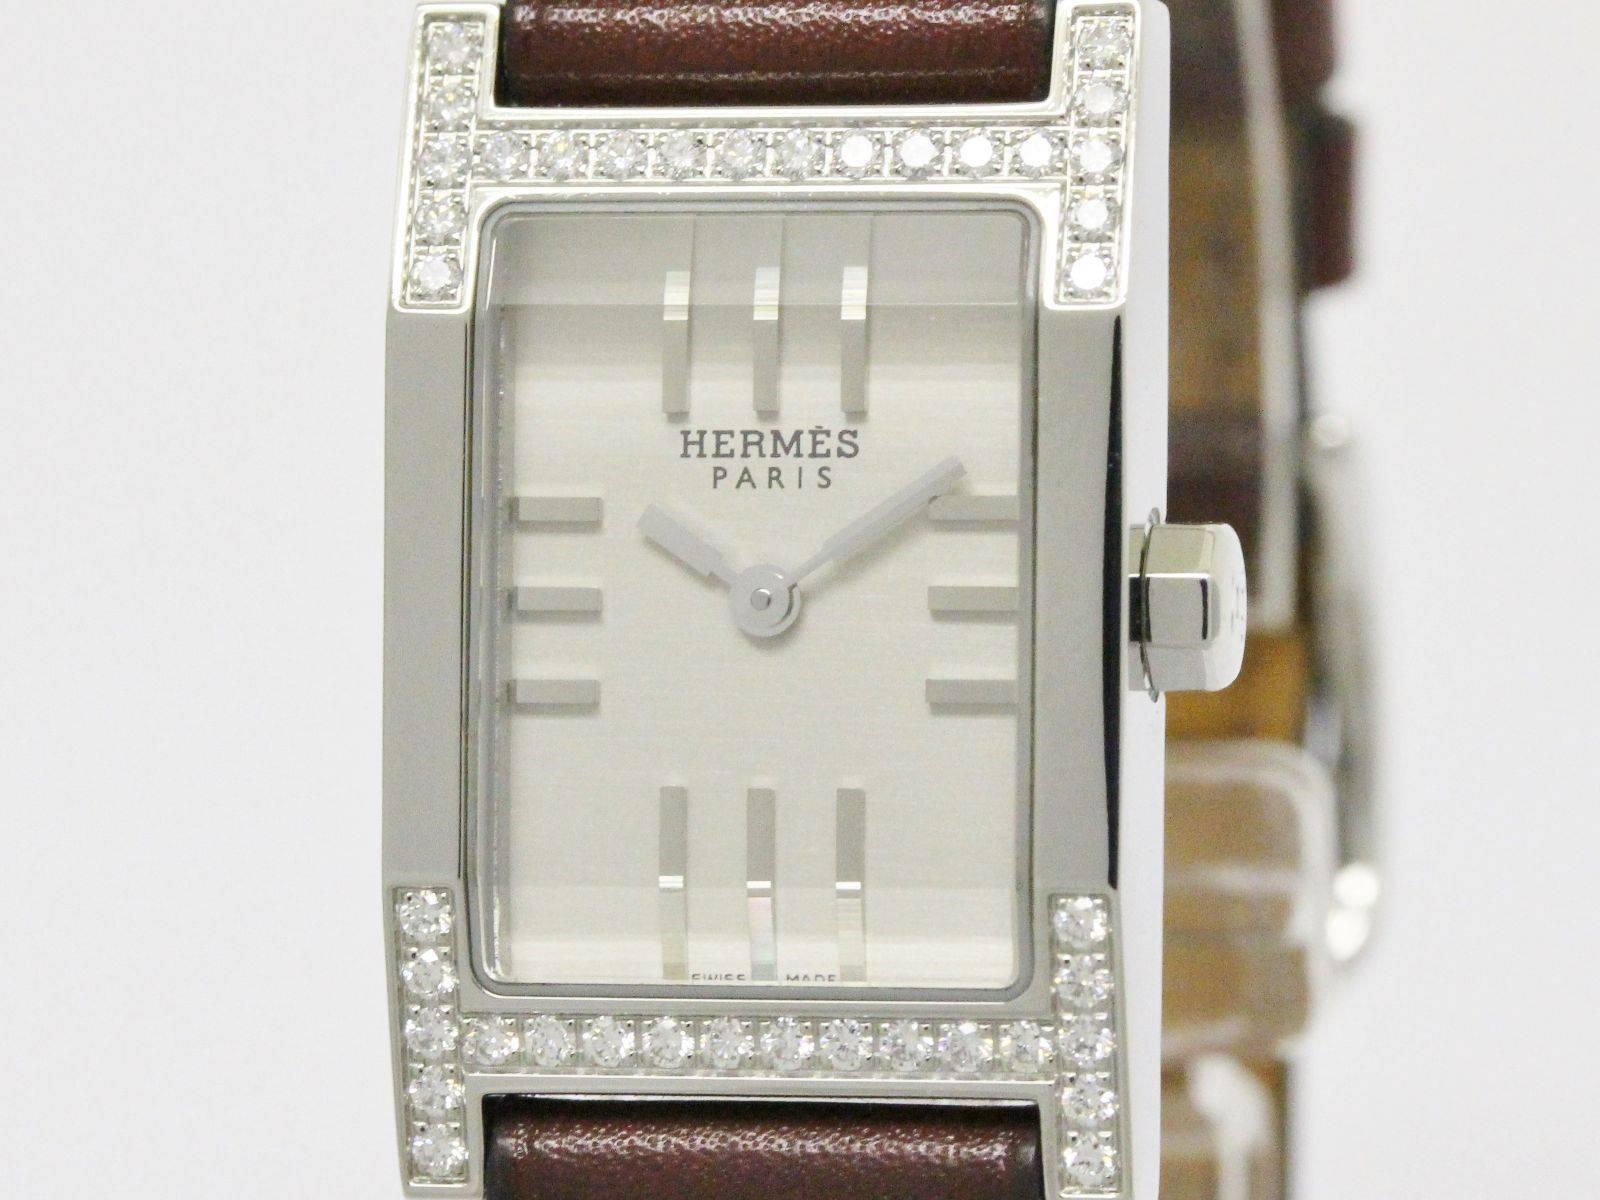 CURATOR'S NOTES

There's having an Hermes watch. And then there's having an Hermes watch draped in diamonds. Gorgeous Hermes Tandem diamond and leather timepiece.

Stainless steel
Diamond 
Leather band 
Quartz movement
Case 19mm
Band